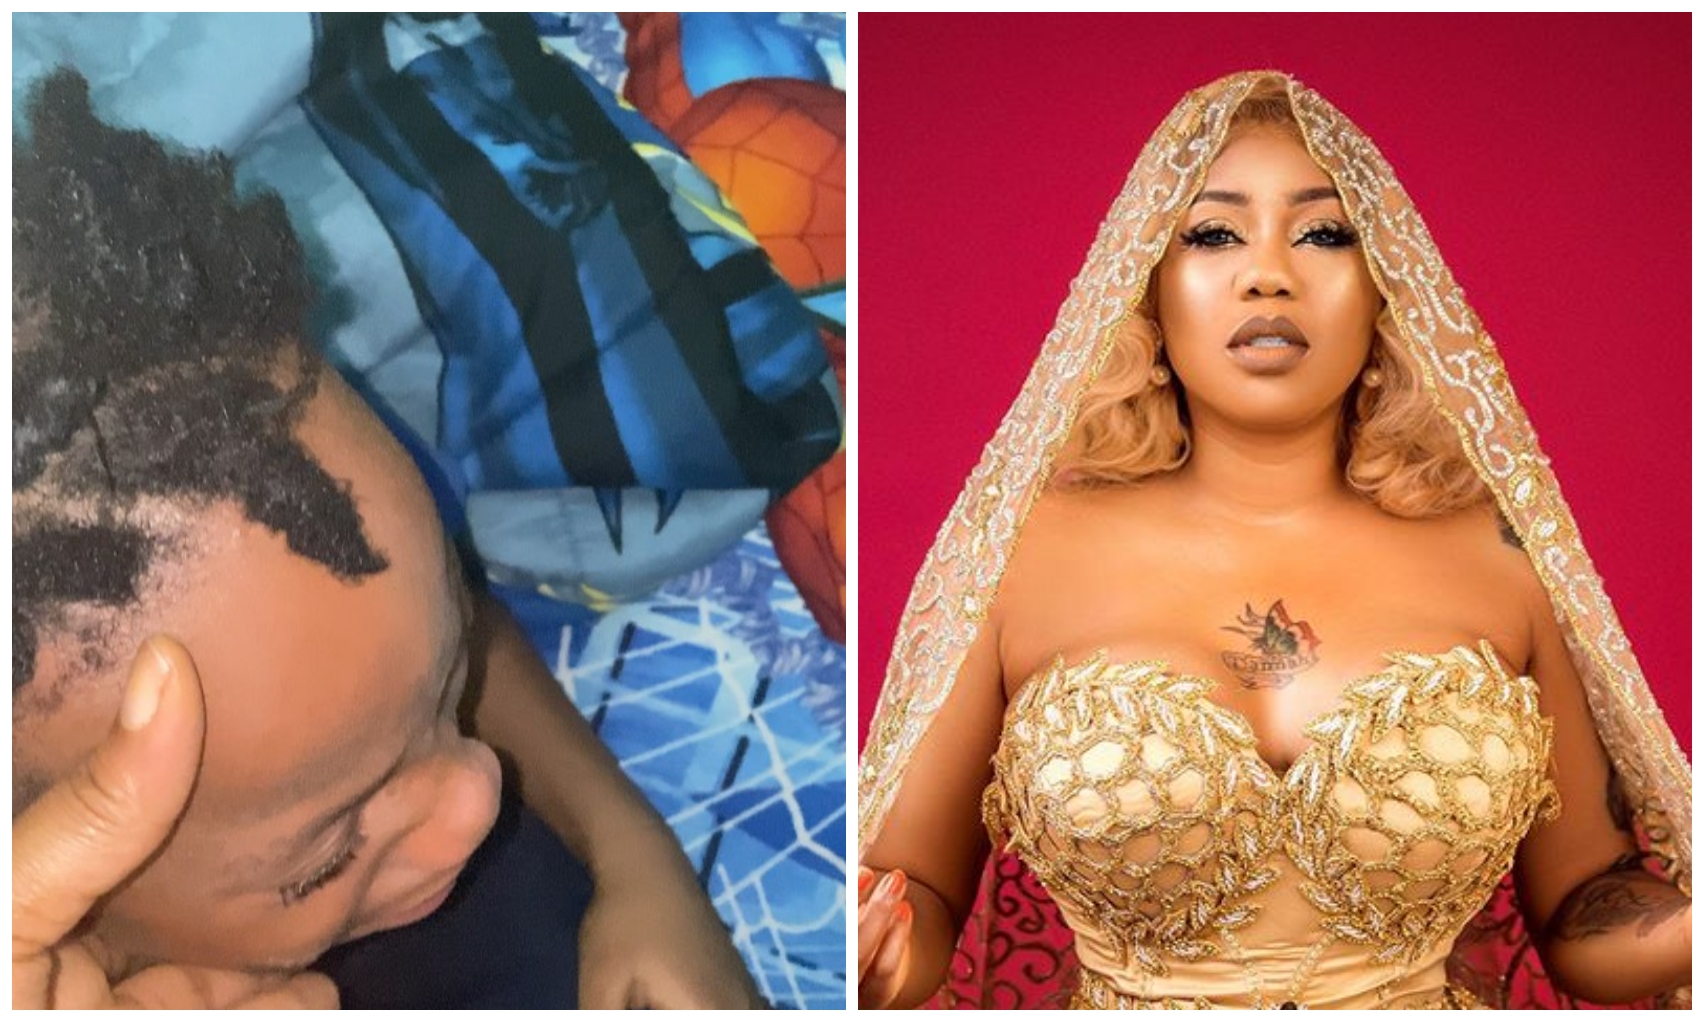 Toyin Lawani's son goes emotional, weep over the death of Chadwick Boseman (Video)